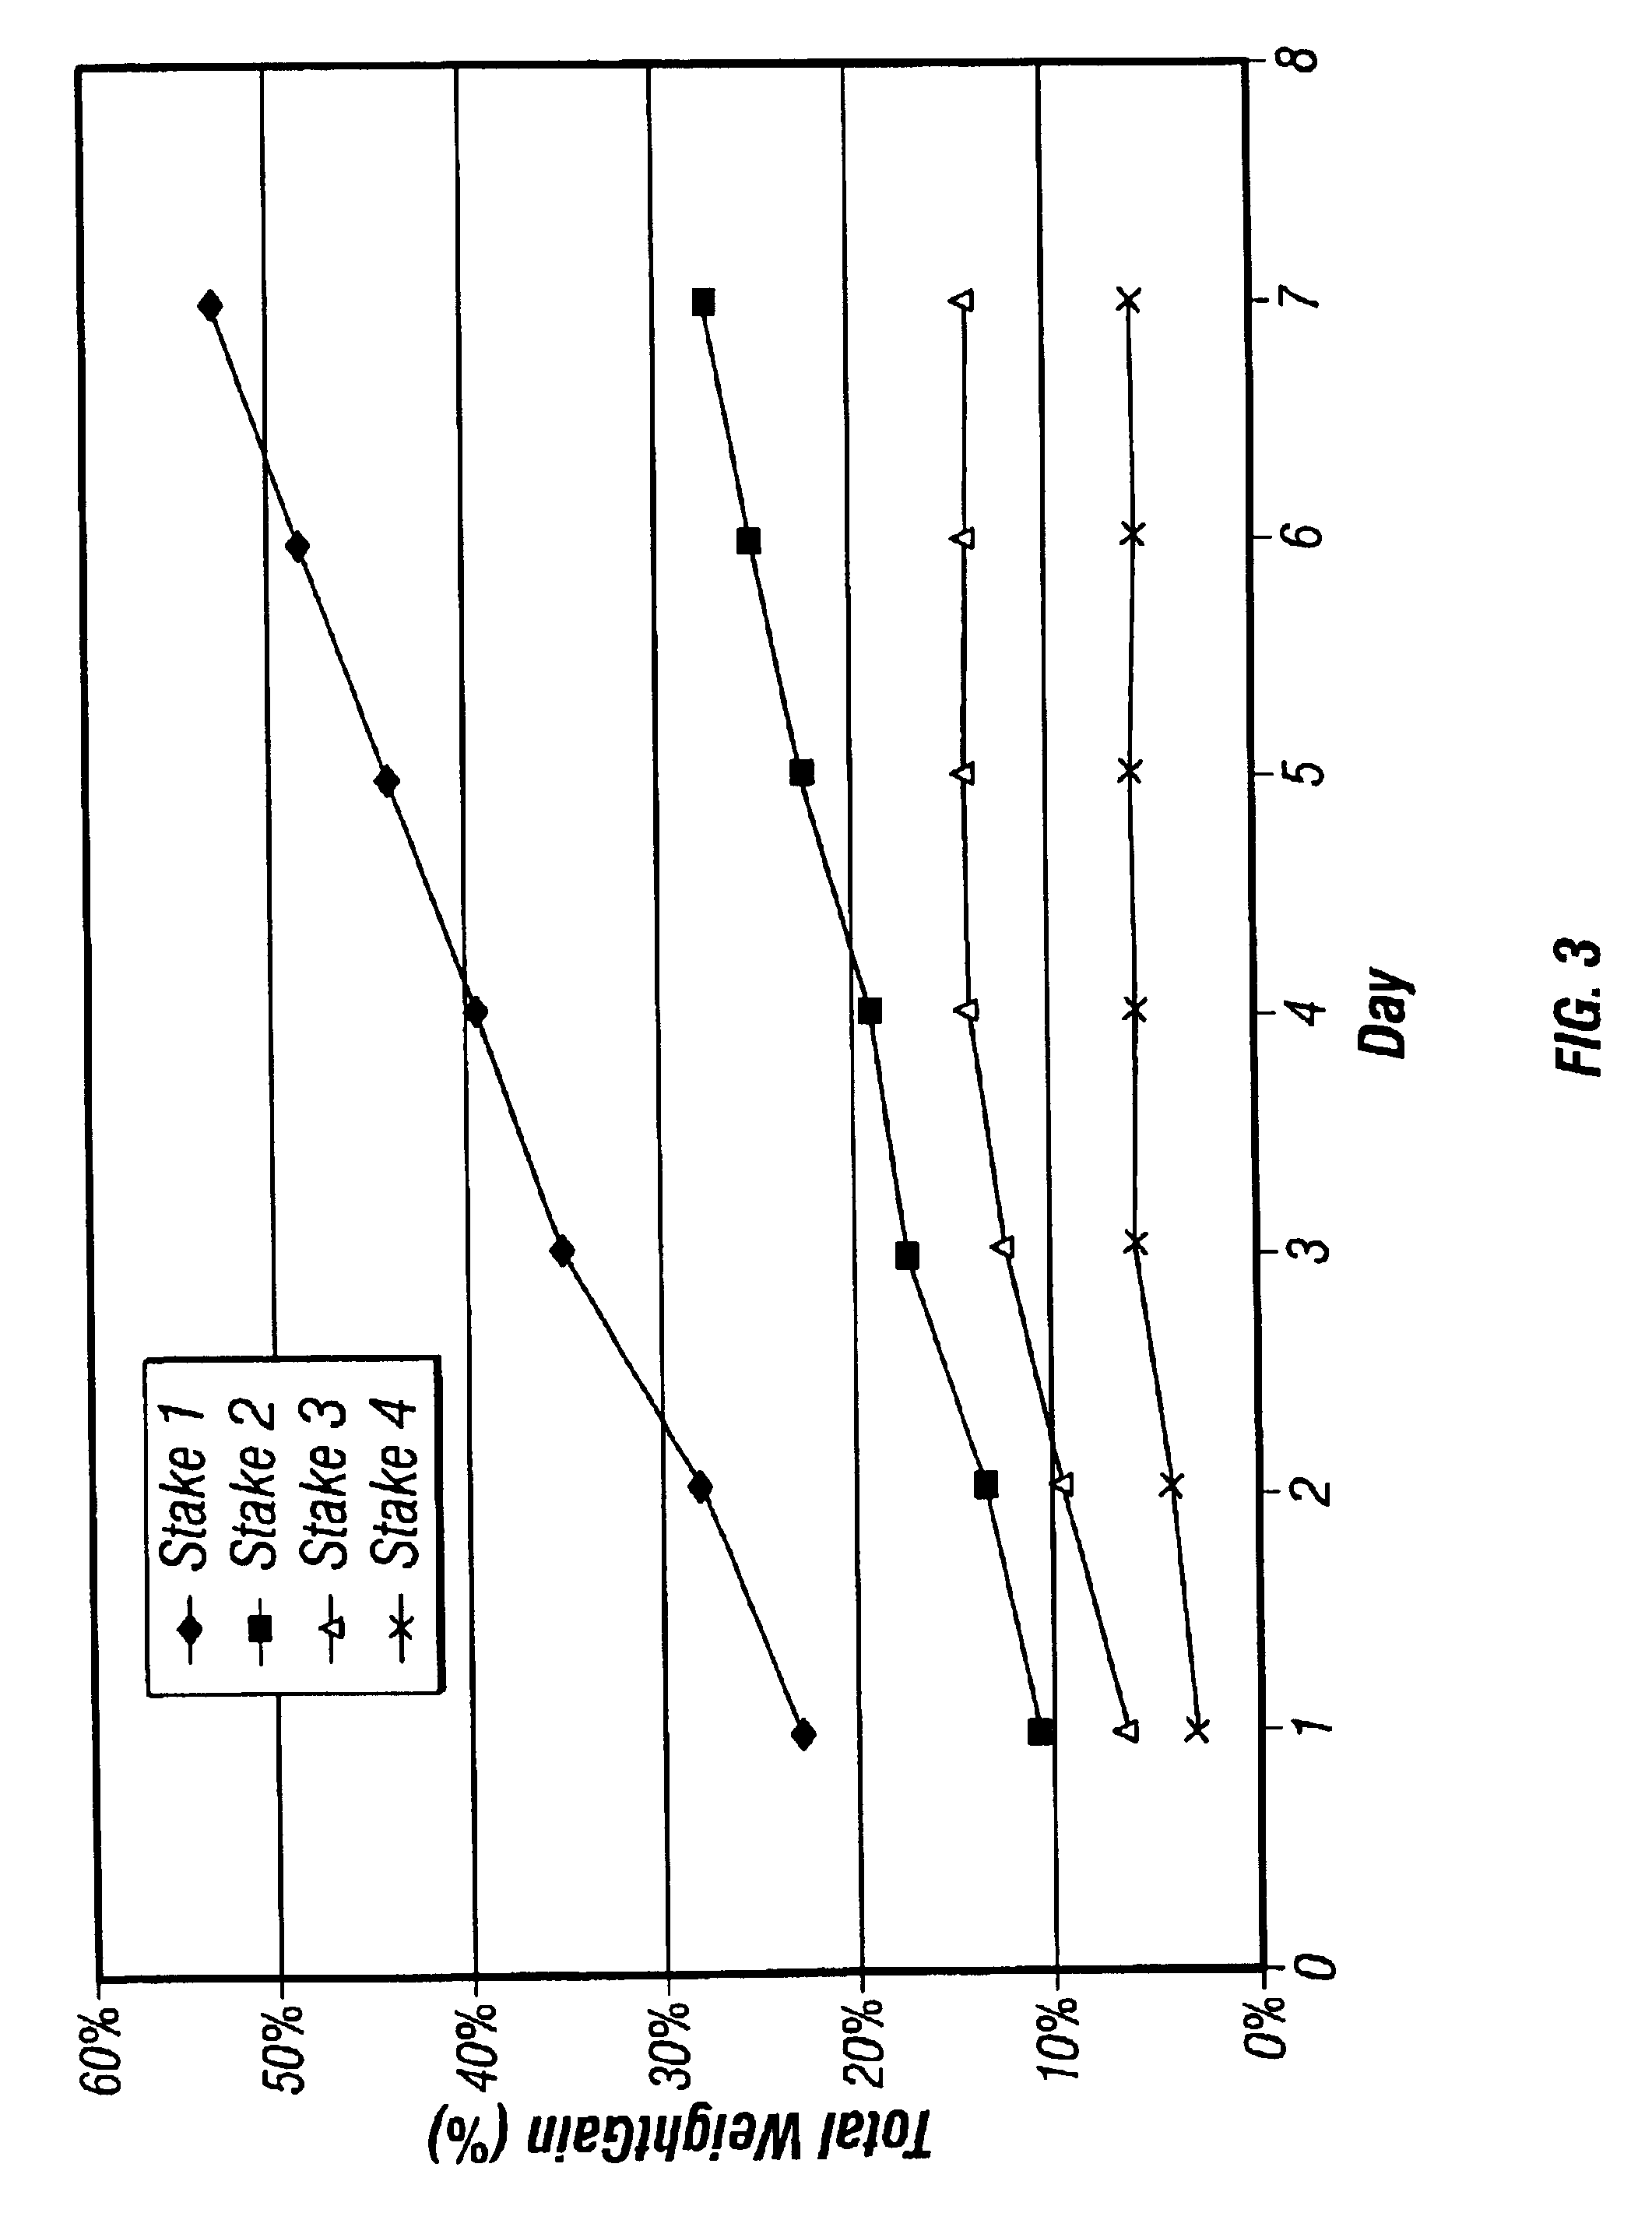 Wood treatment composition and method of use